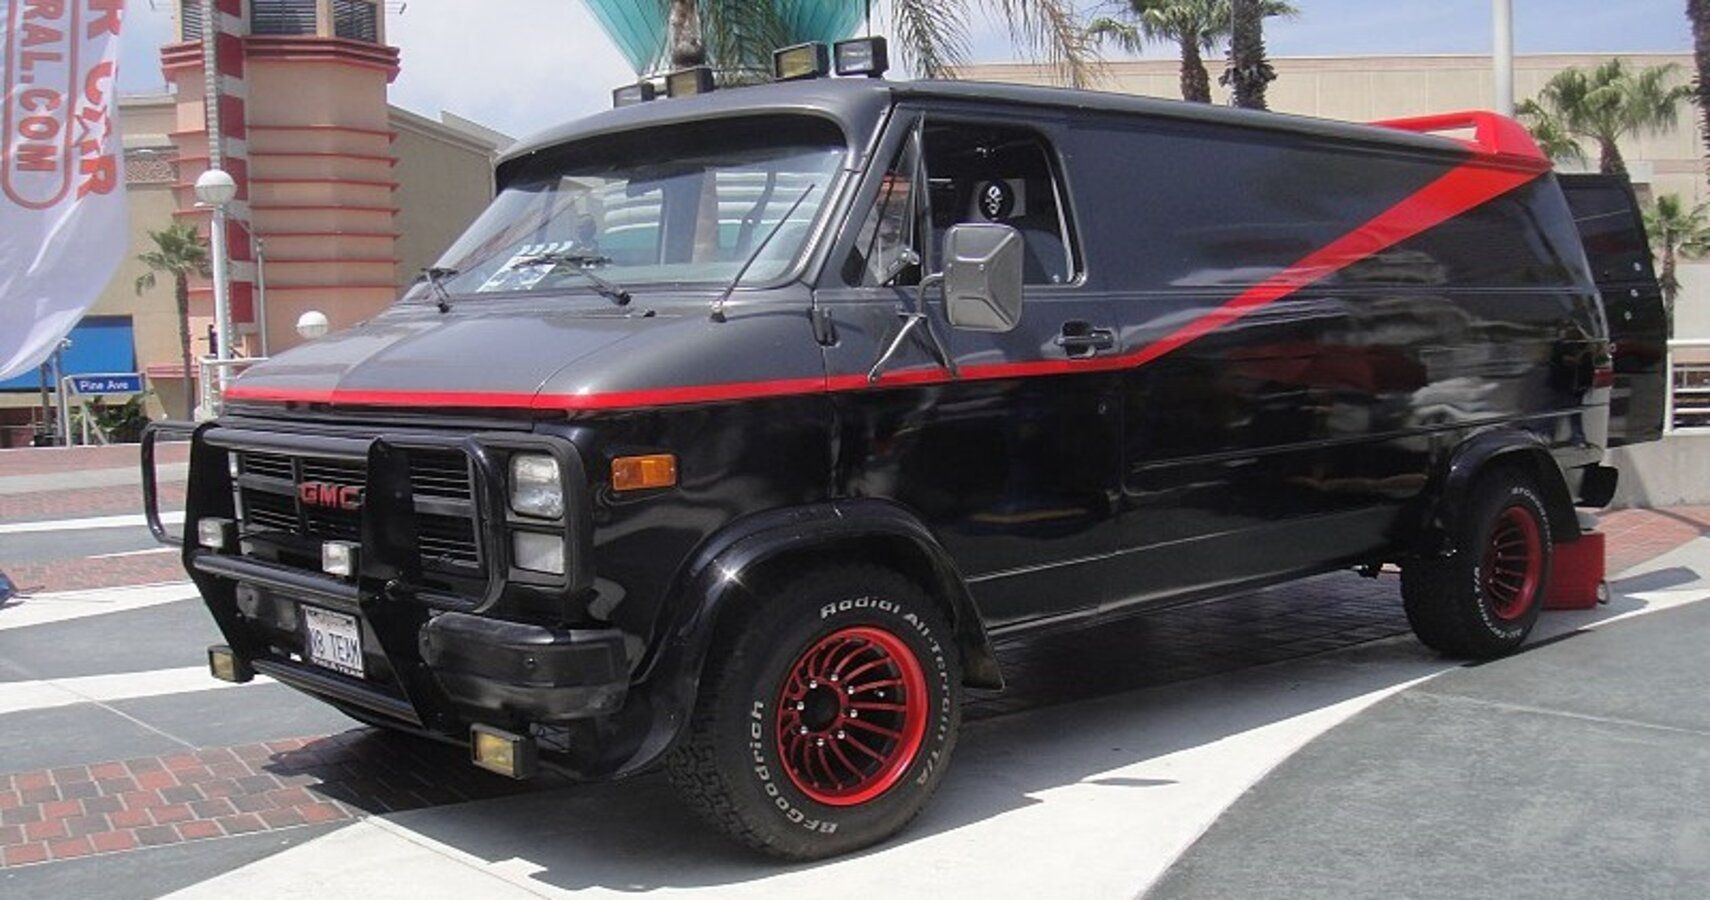 Detailed Look At The 1983 GMC Van From The A-Team